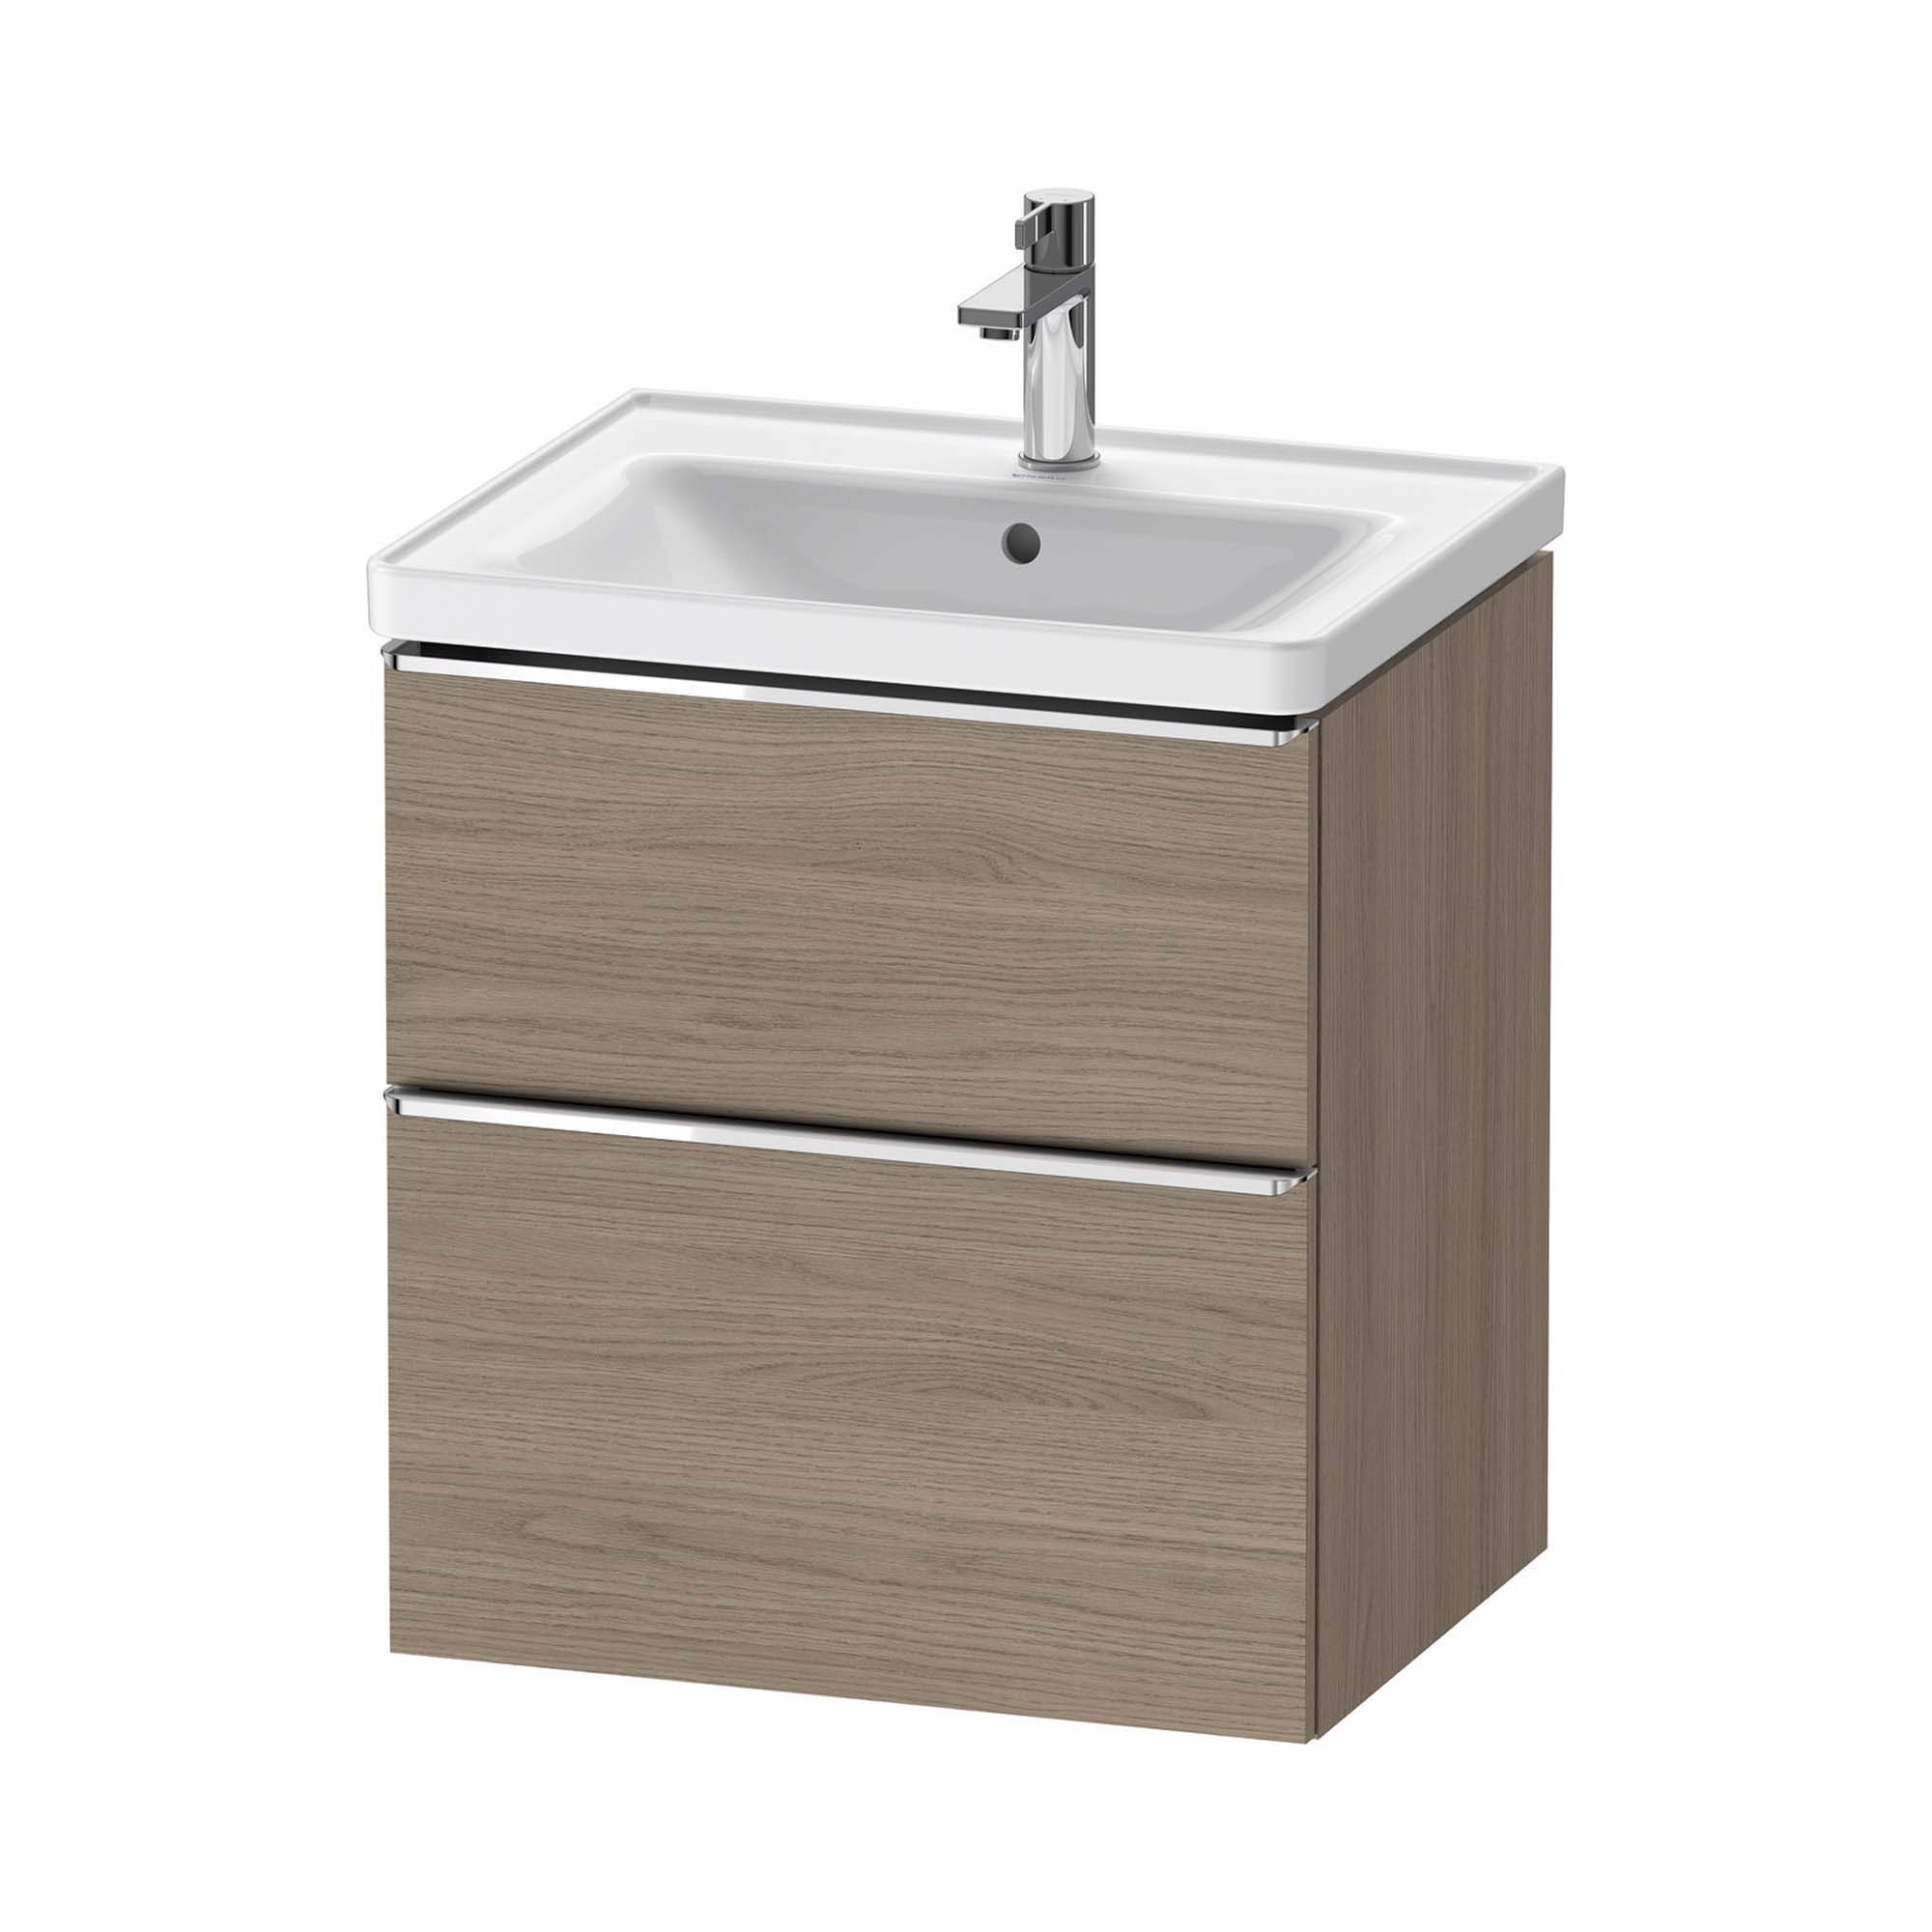 duravit d-neo 600 wall mounted vanity unit with d-neo basin oak terra chrome handles